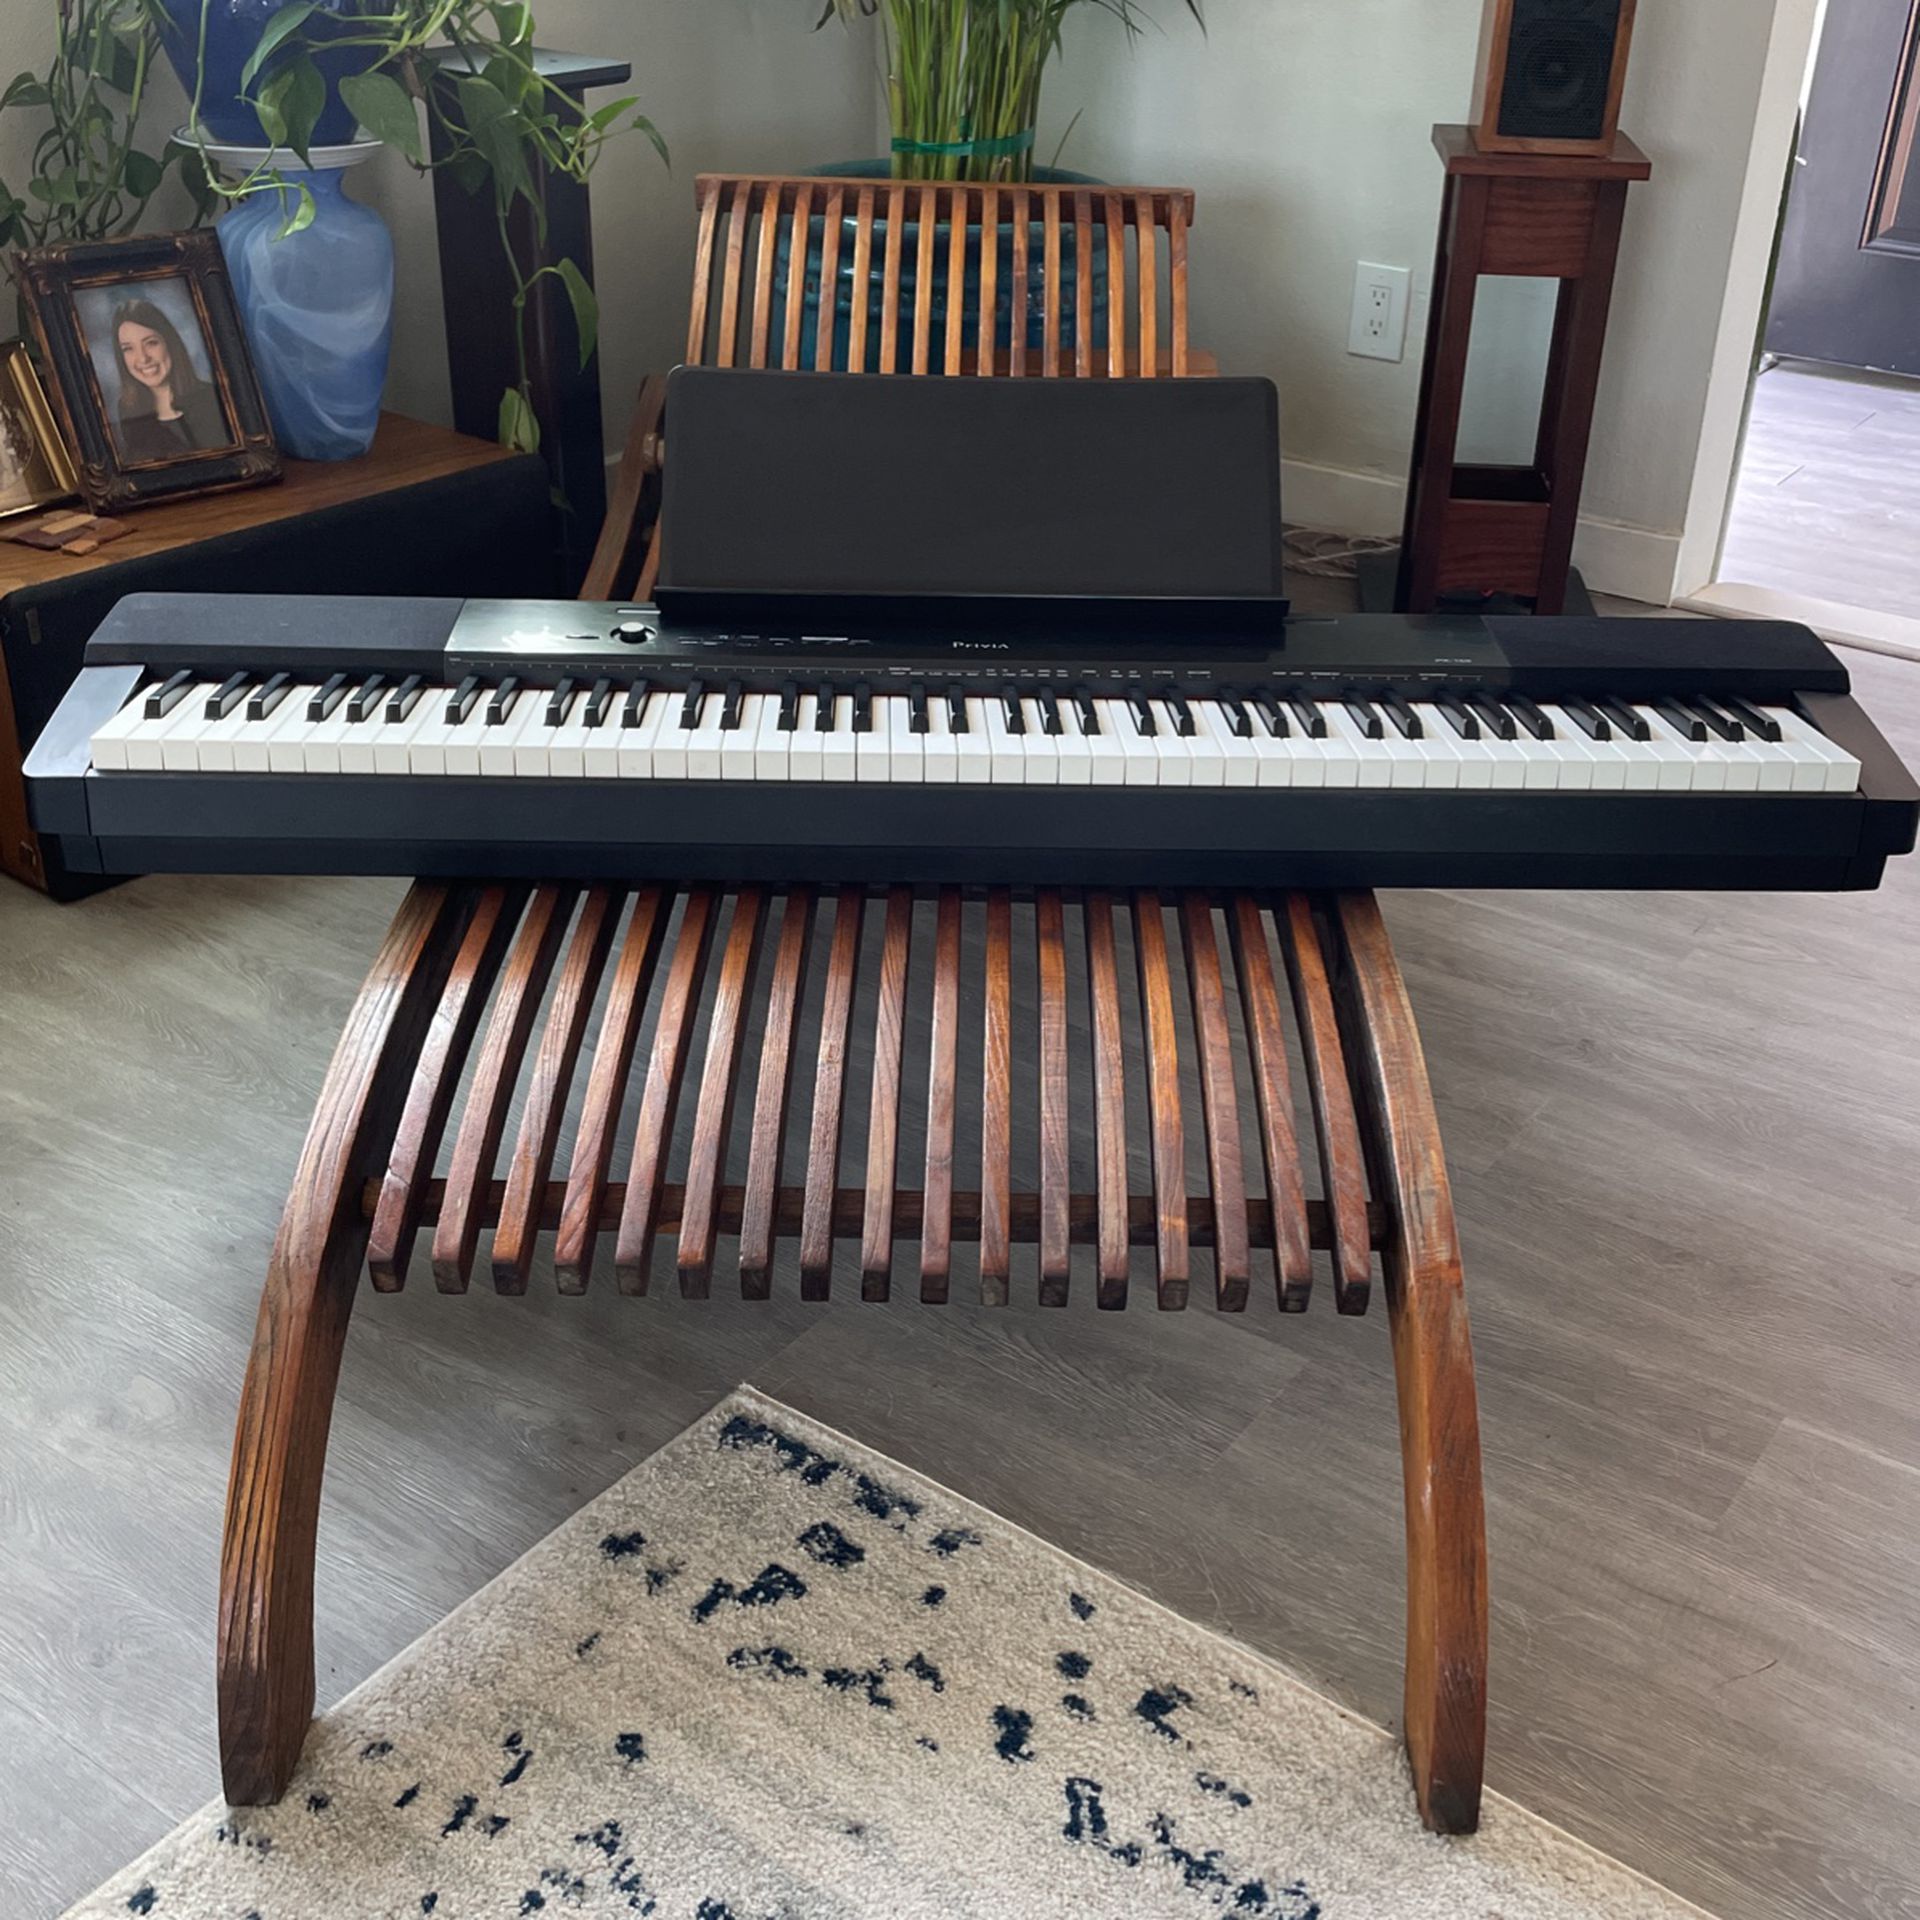 PX Privia Real Weighted Keyboard for Sale in Vista, CA - OfferUp